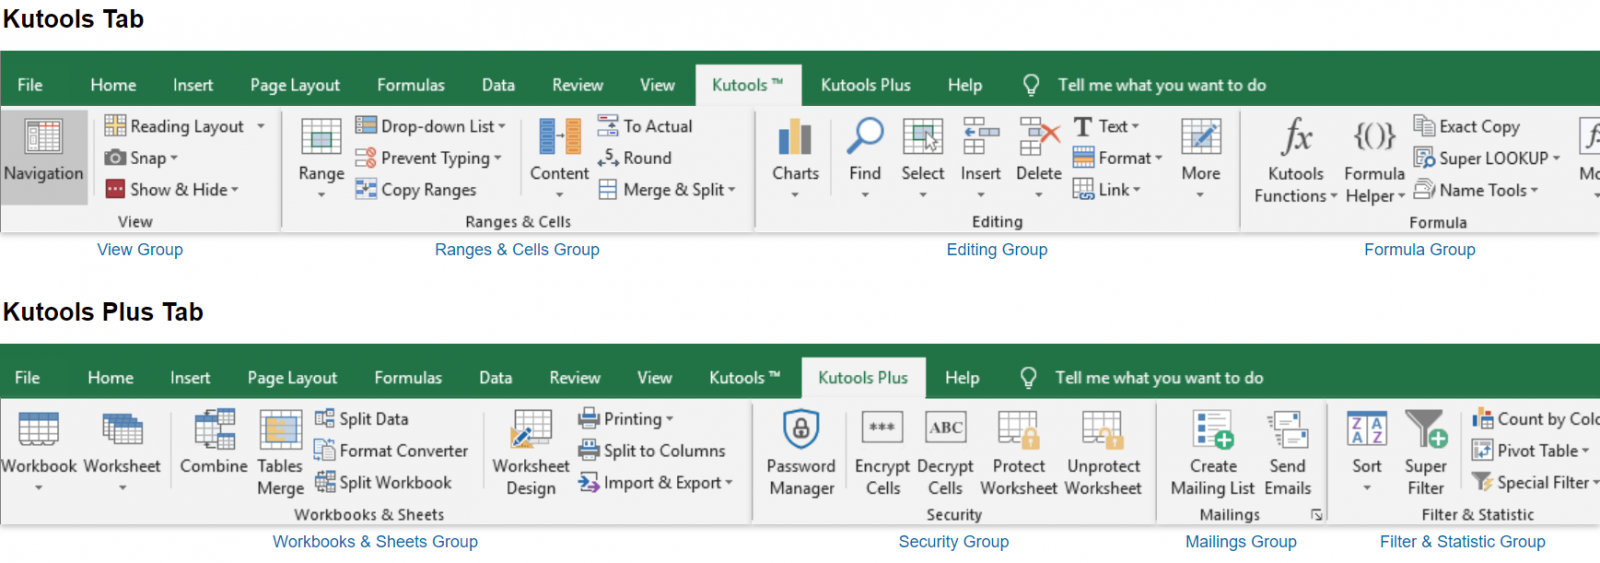 kutools for excel 2016 import pictures